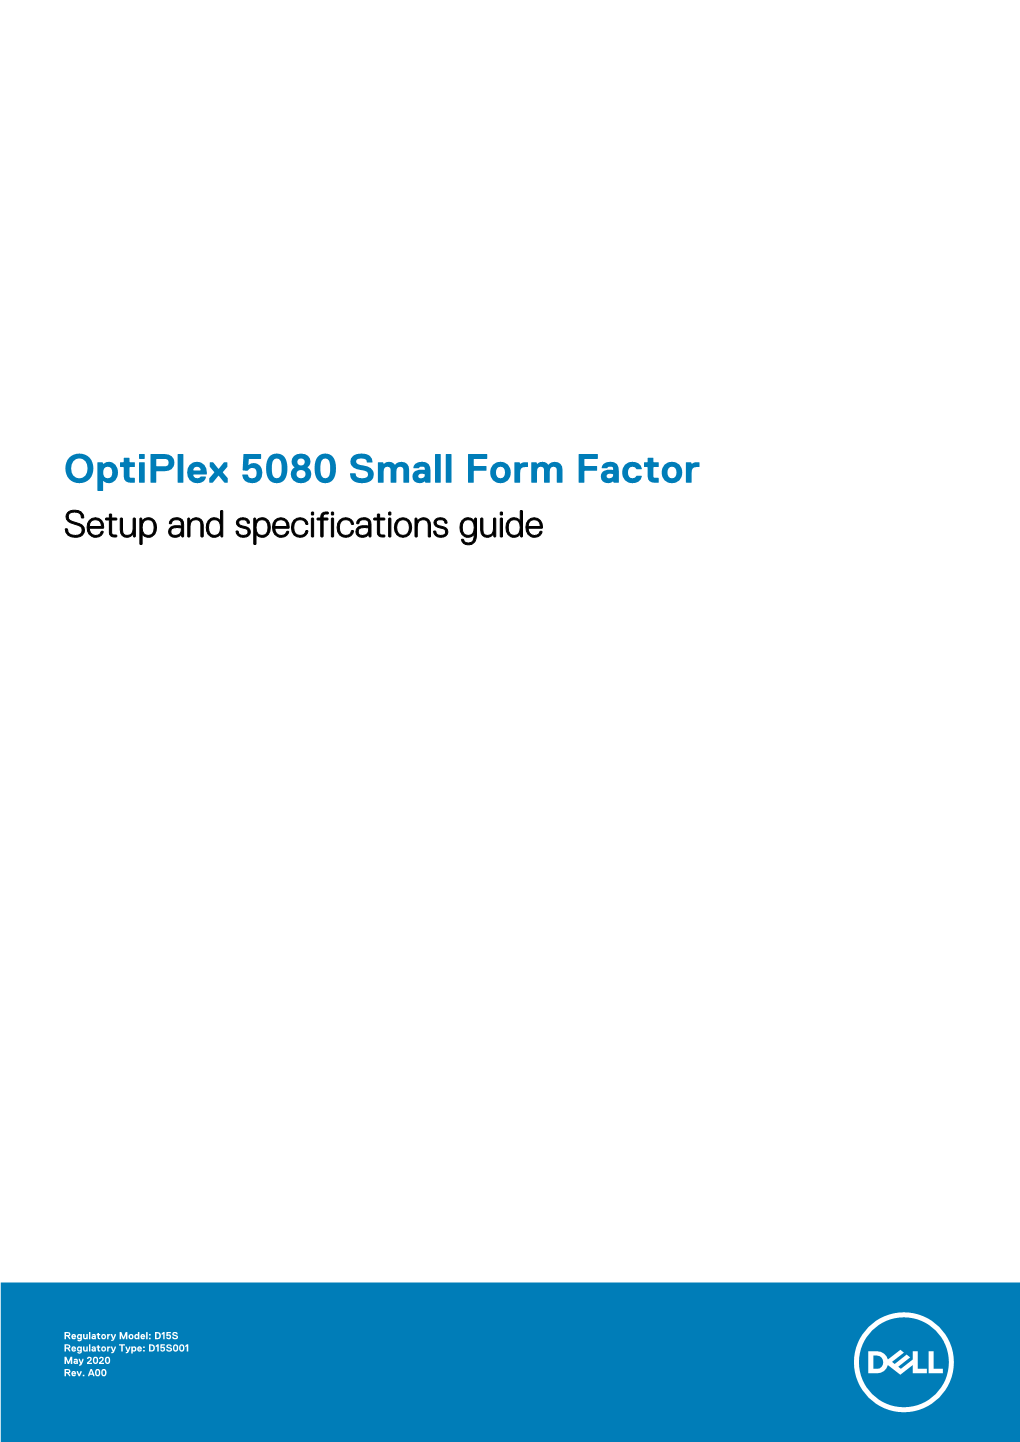 Optiplex 5080 Small Form Factor Setup and Specifications Guide